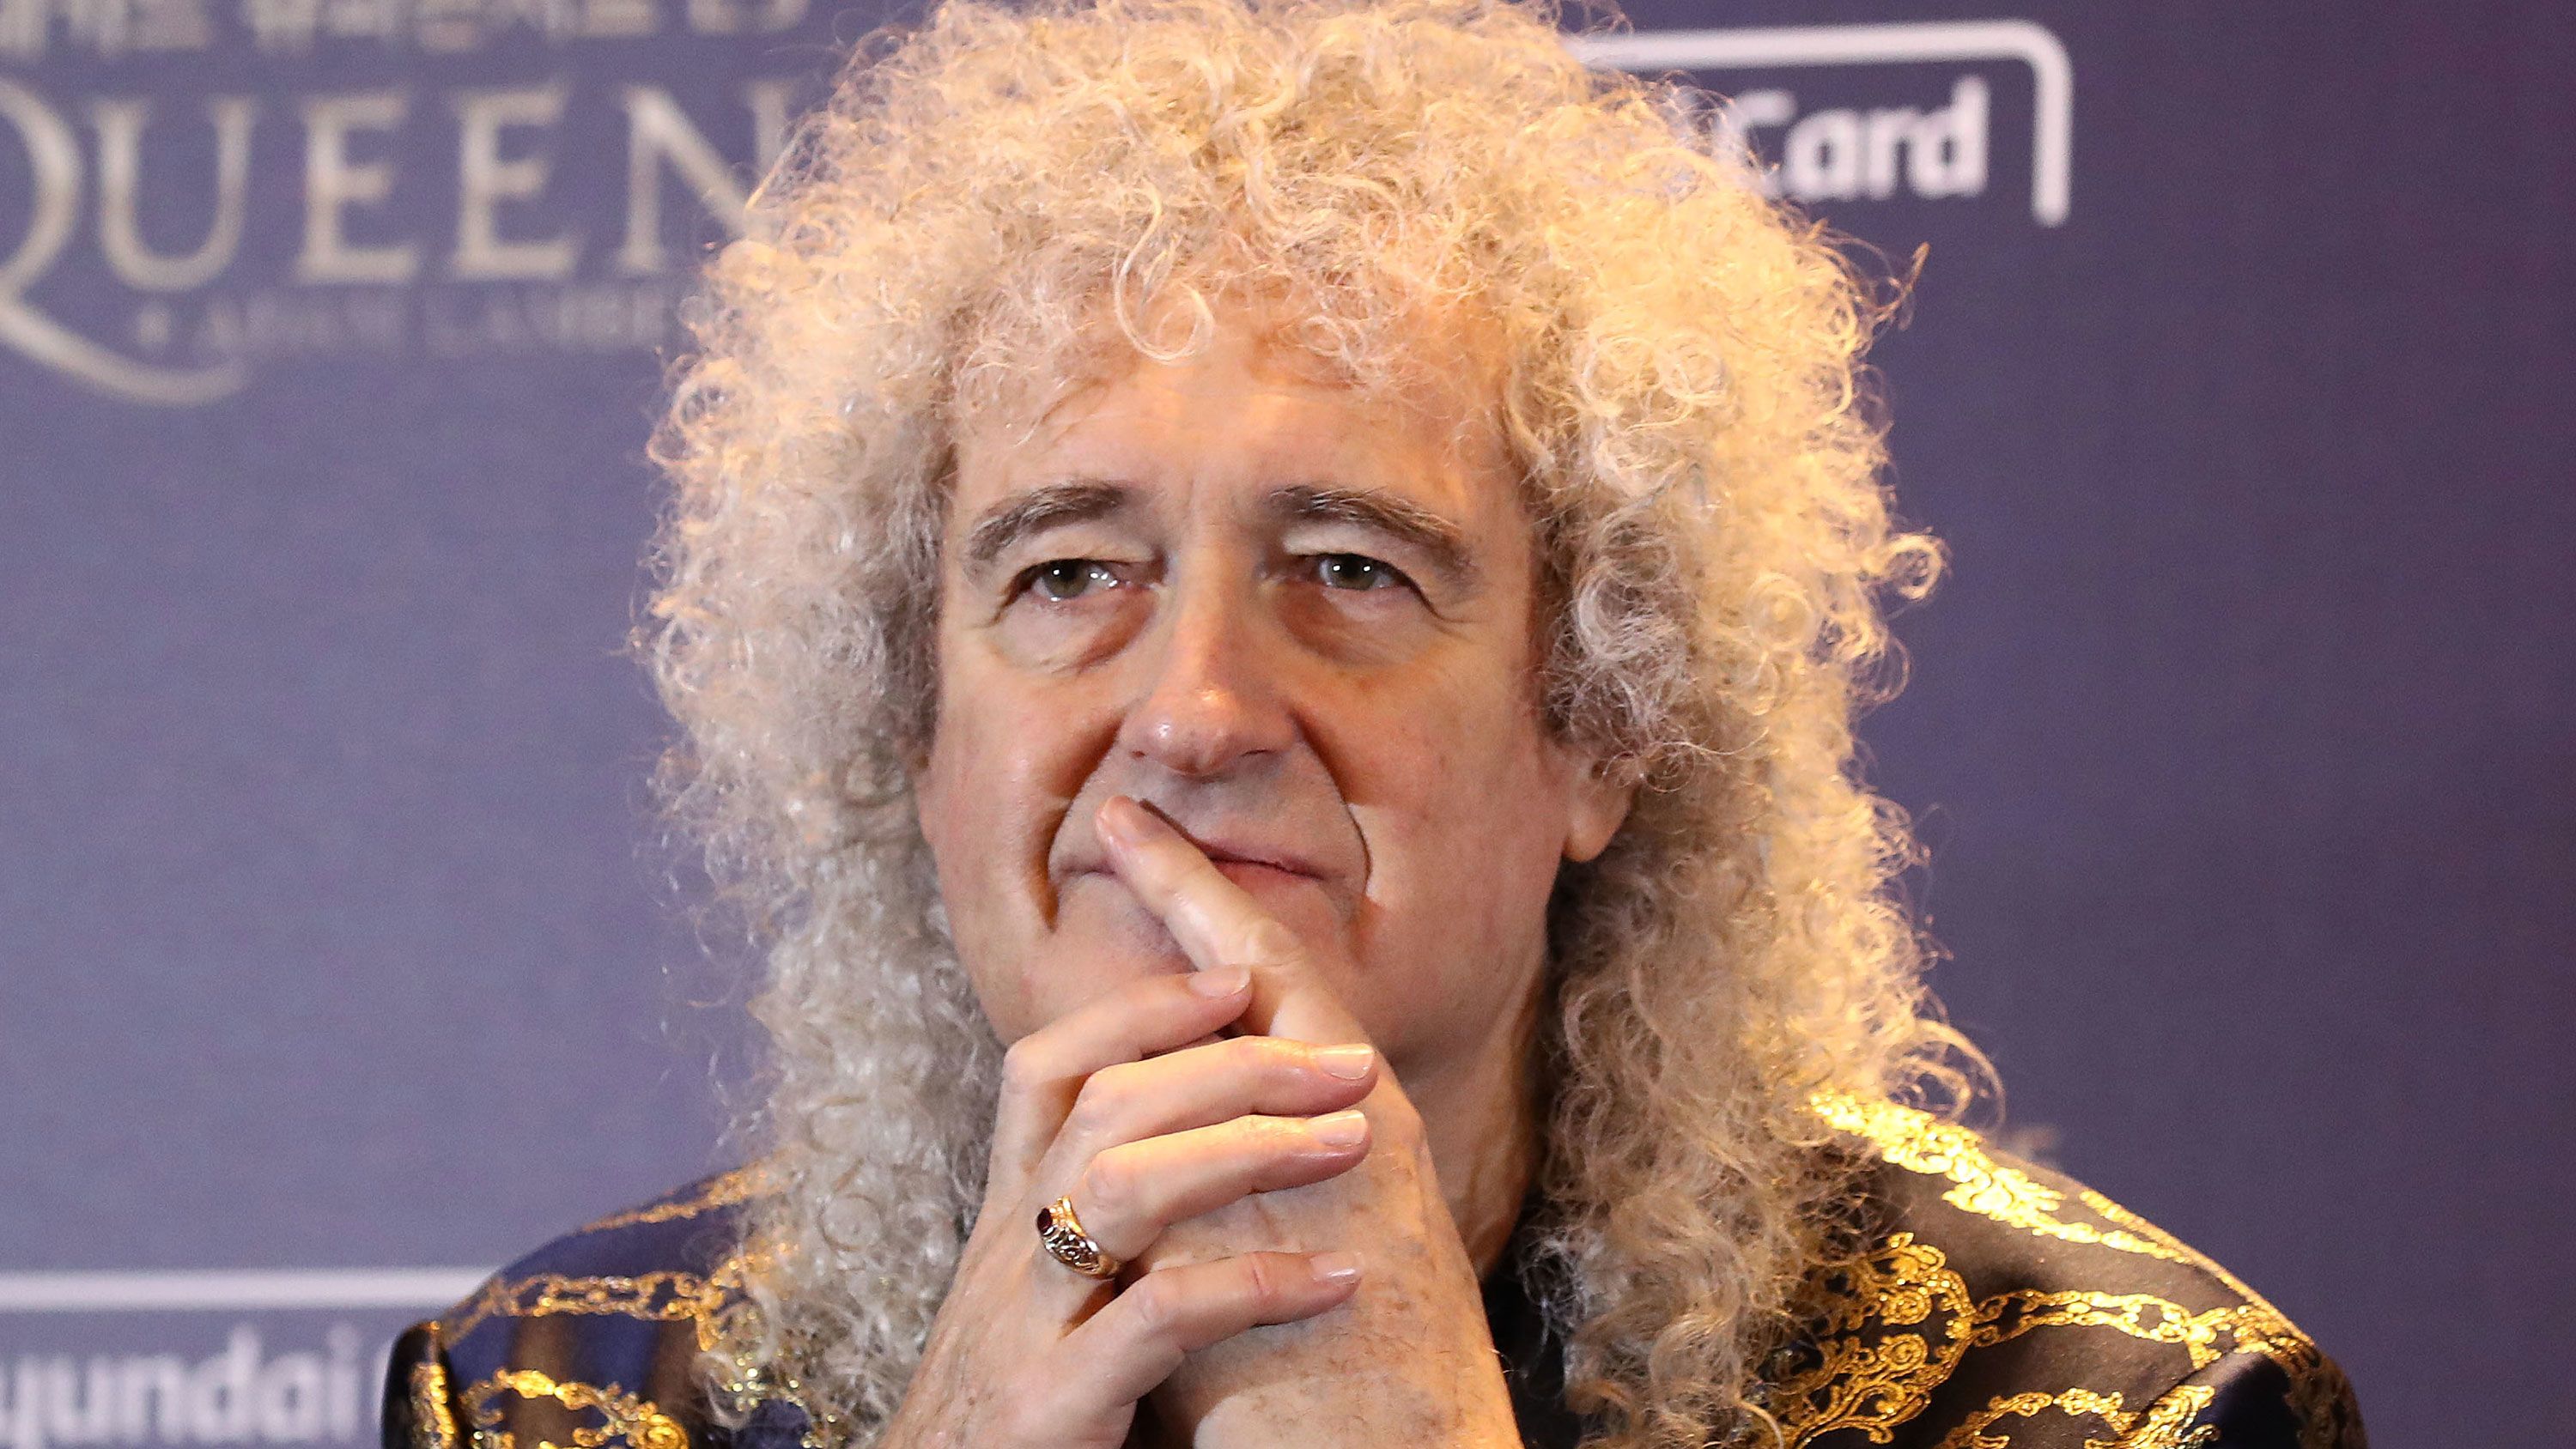 Brian May hospitalized after injuring buttocks while gardening | CNN